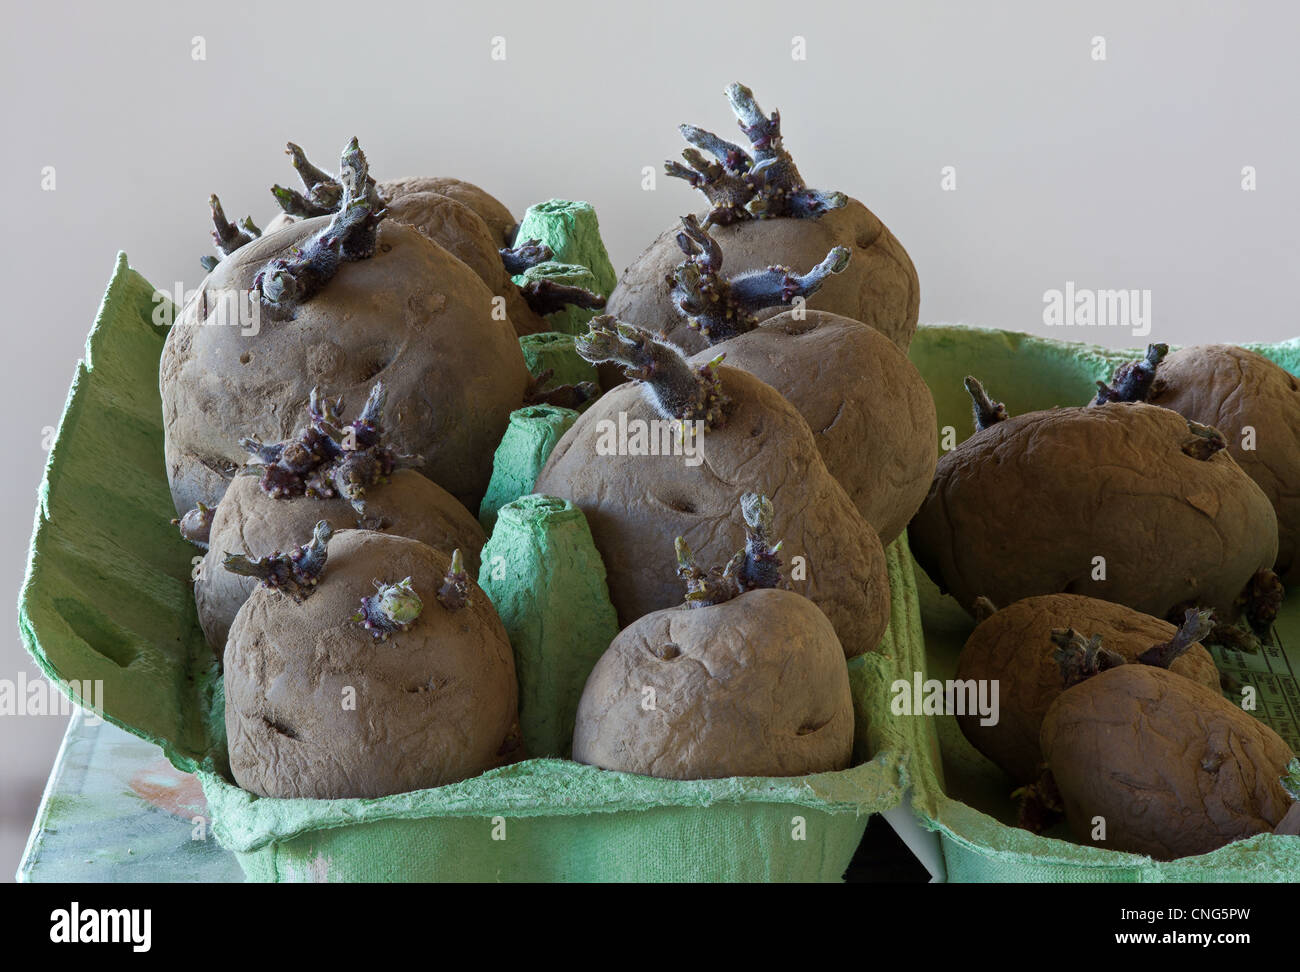 seed potatoes being chitted in an egg carton. Stock Photo